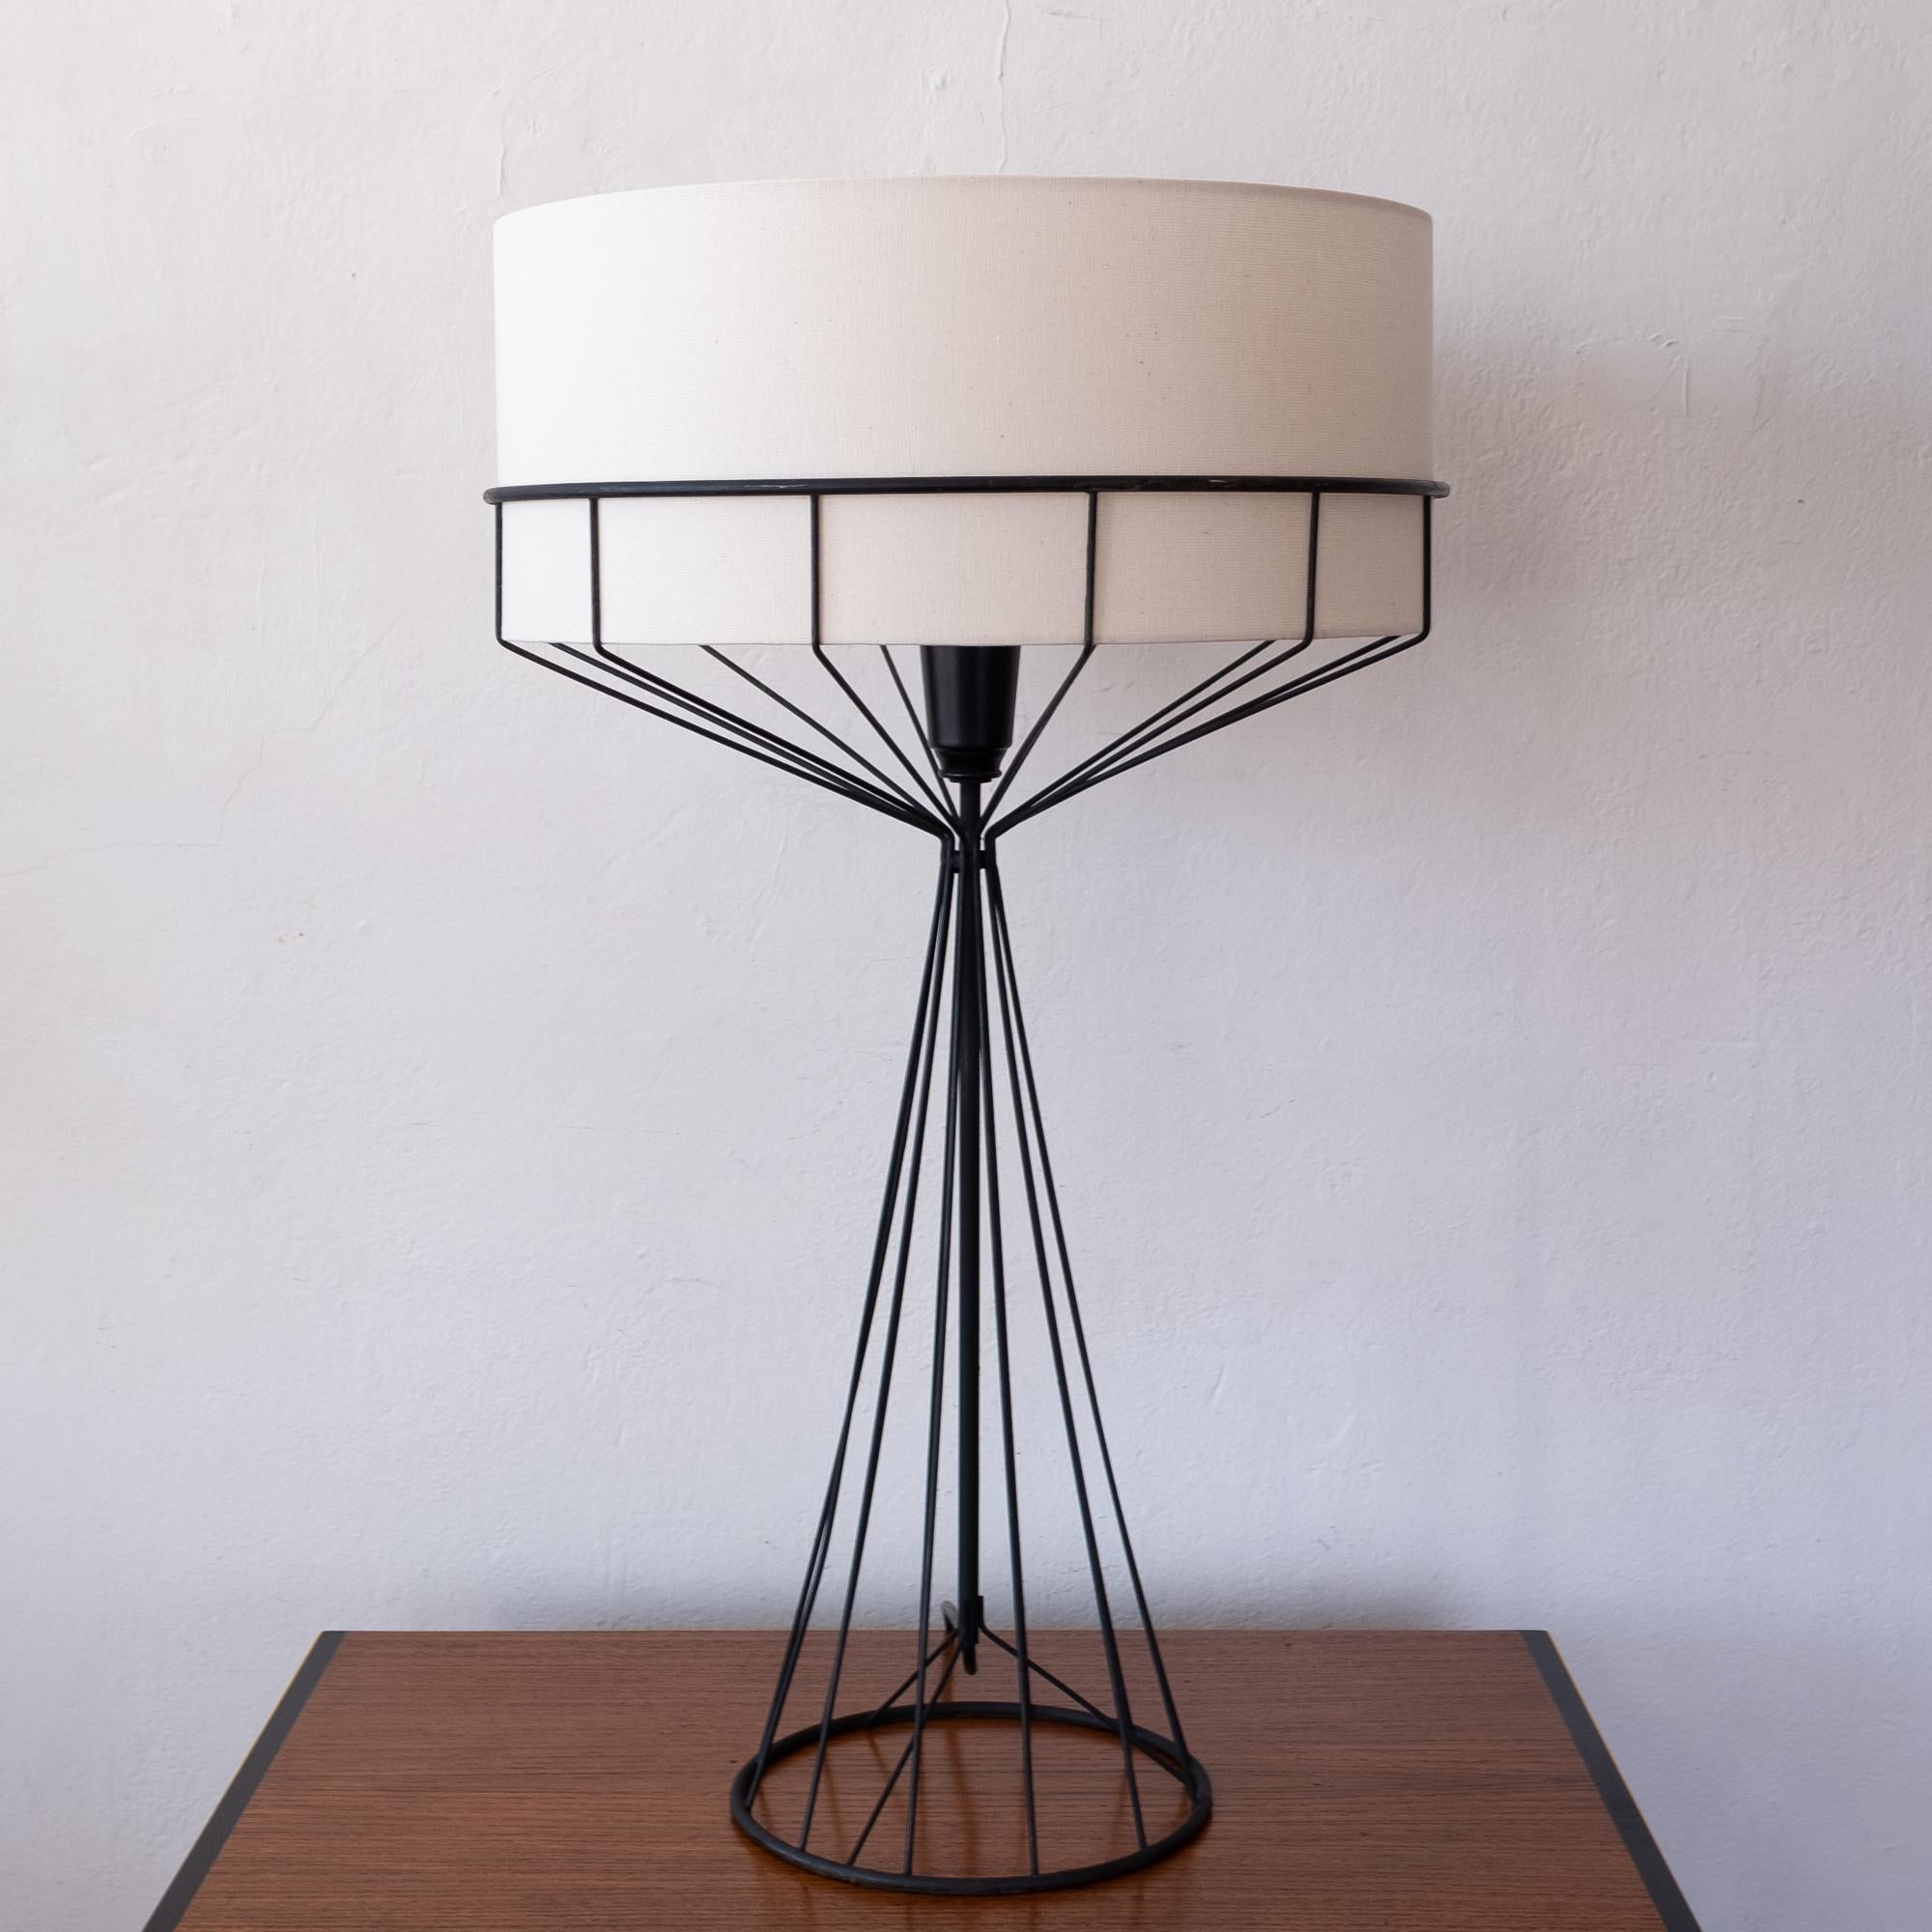 Table lamp by Tony Paul. Enameled metal, new natural linen shade. From the Wire series, produced by Elton. USA, 1950s.